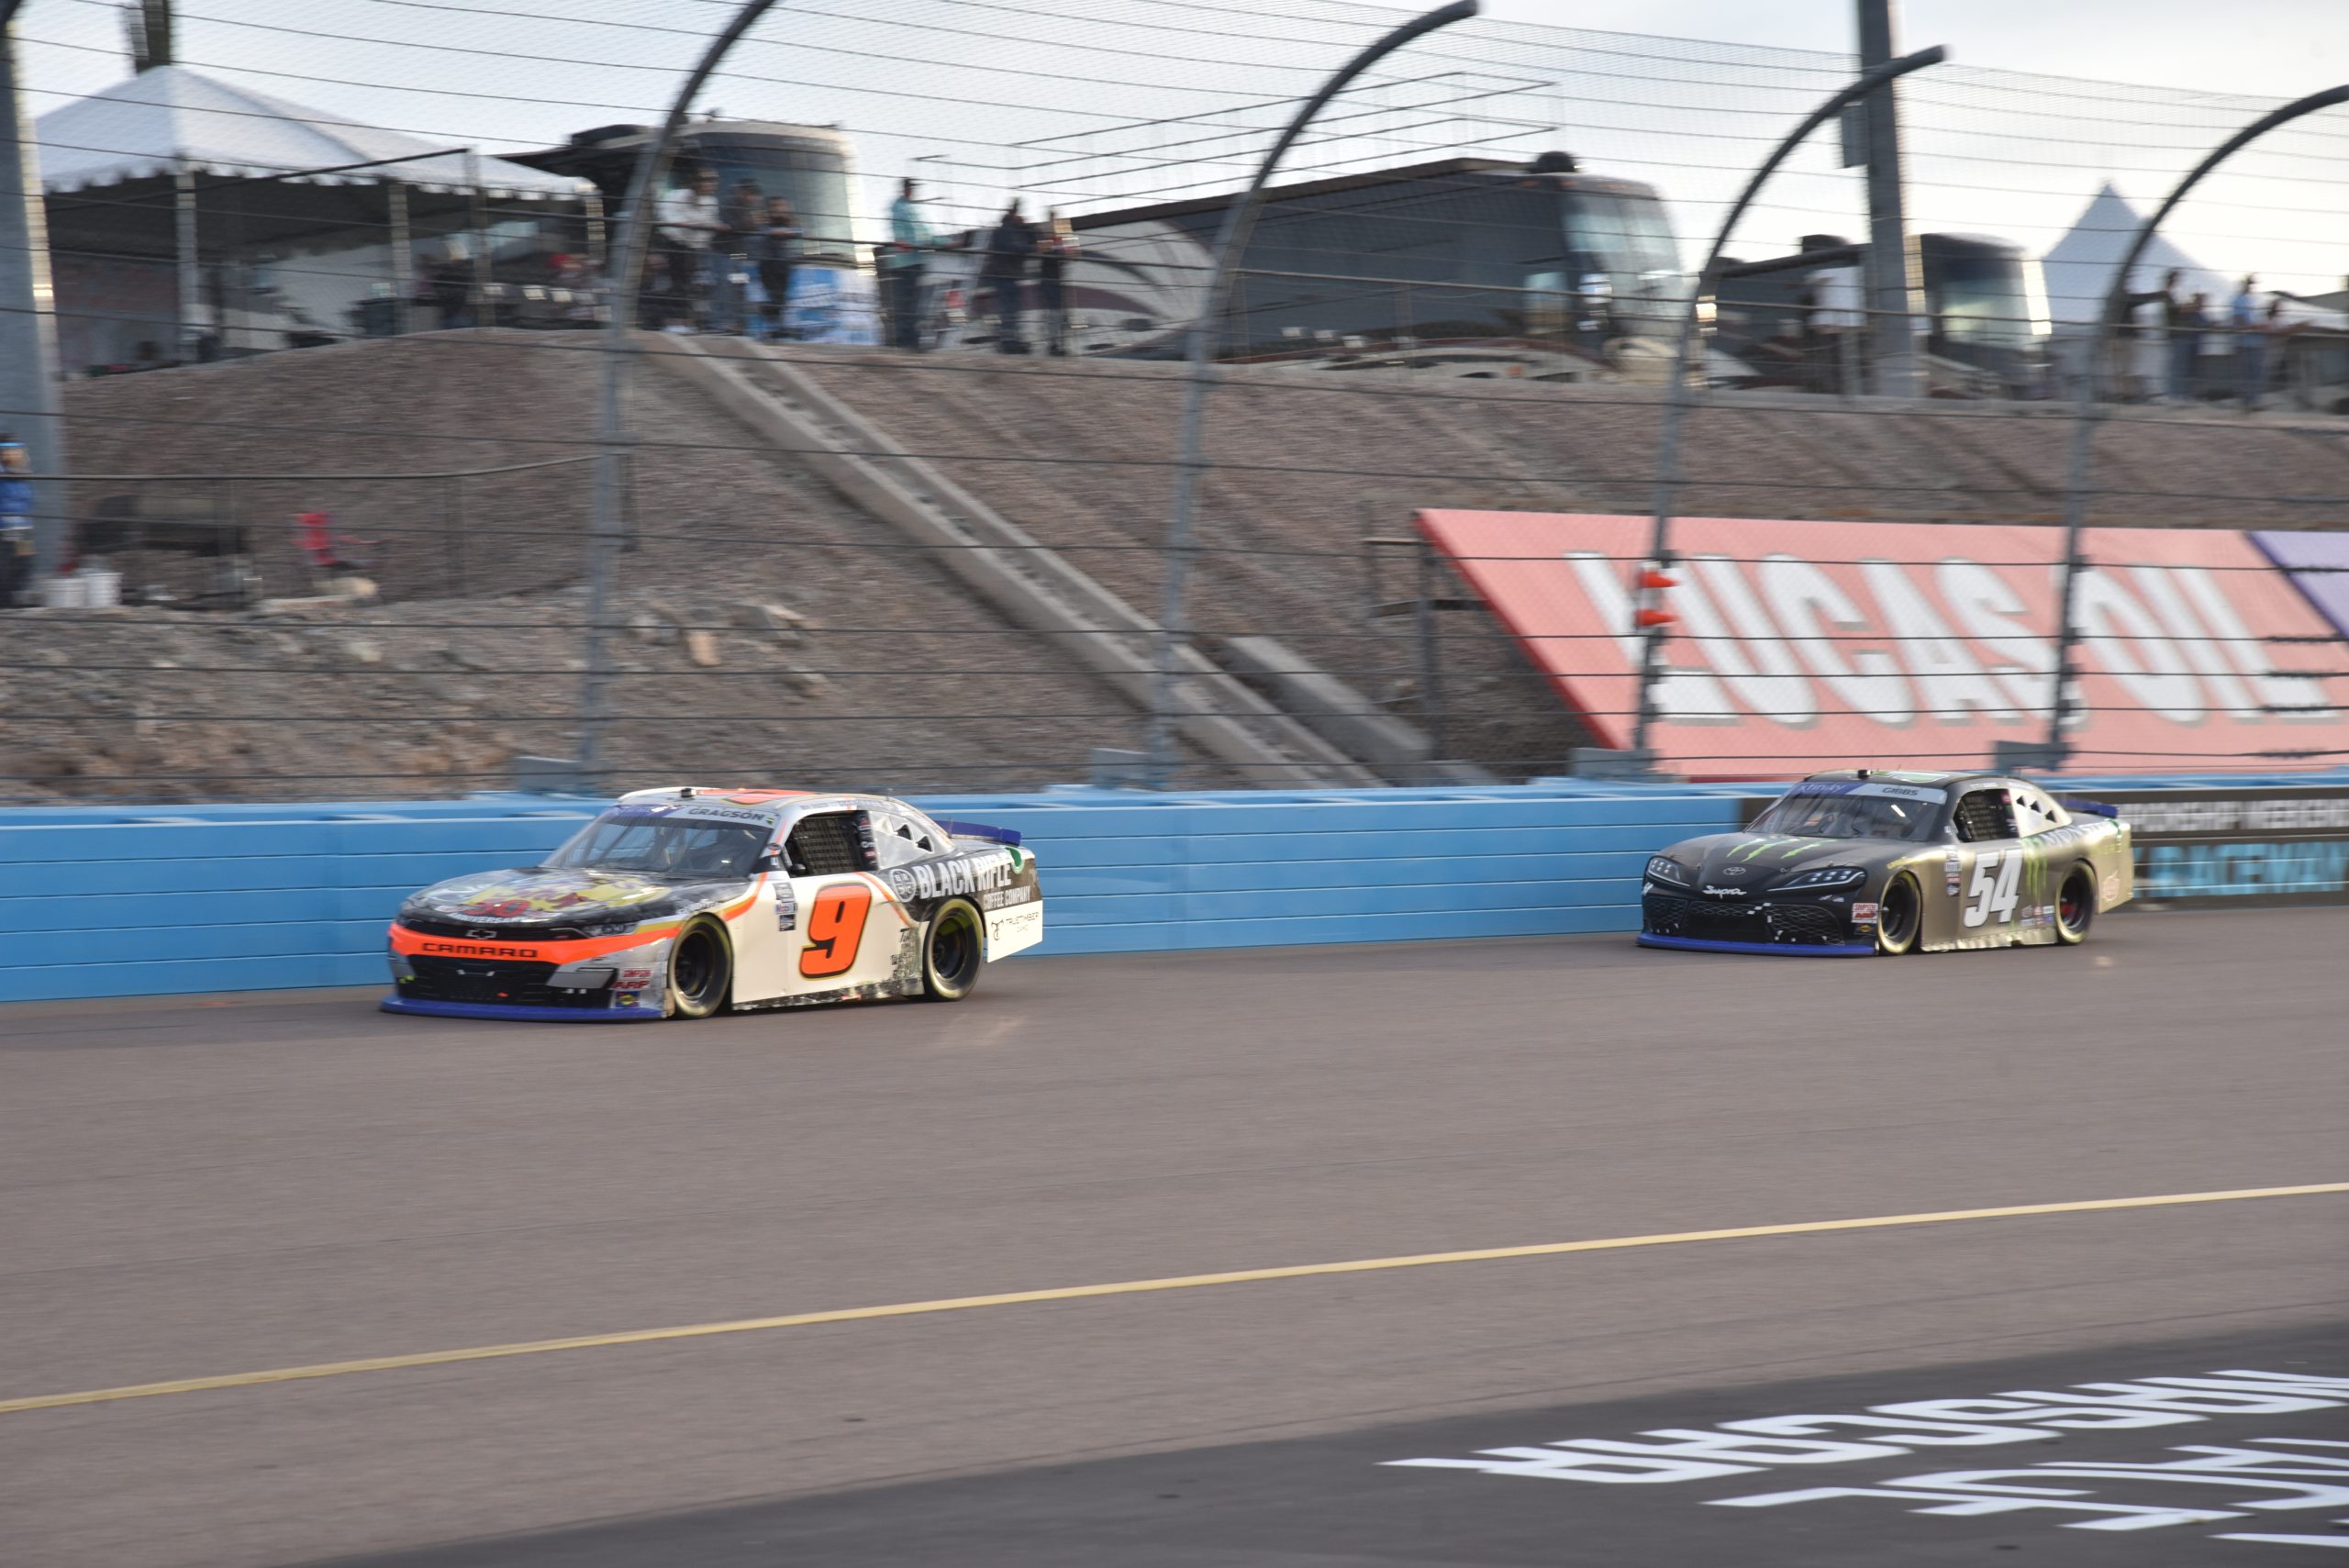 There was no holding back between Gragson and Gibbs at Phoenix. (Photo: Luis Torres | The Podium Finish)